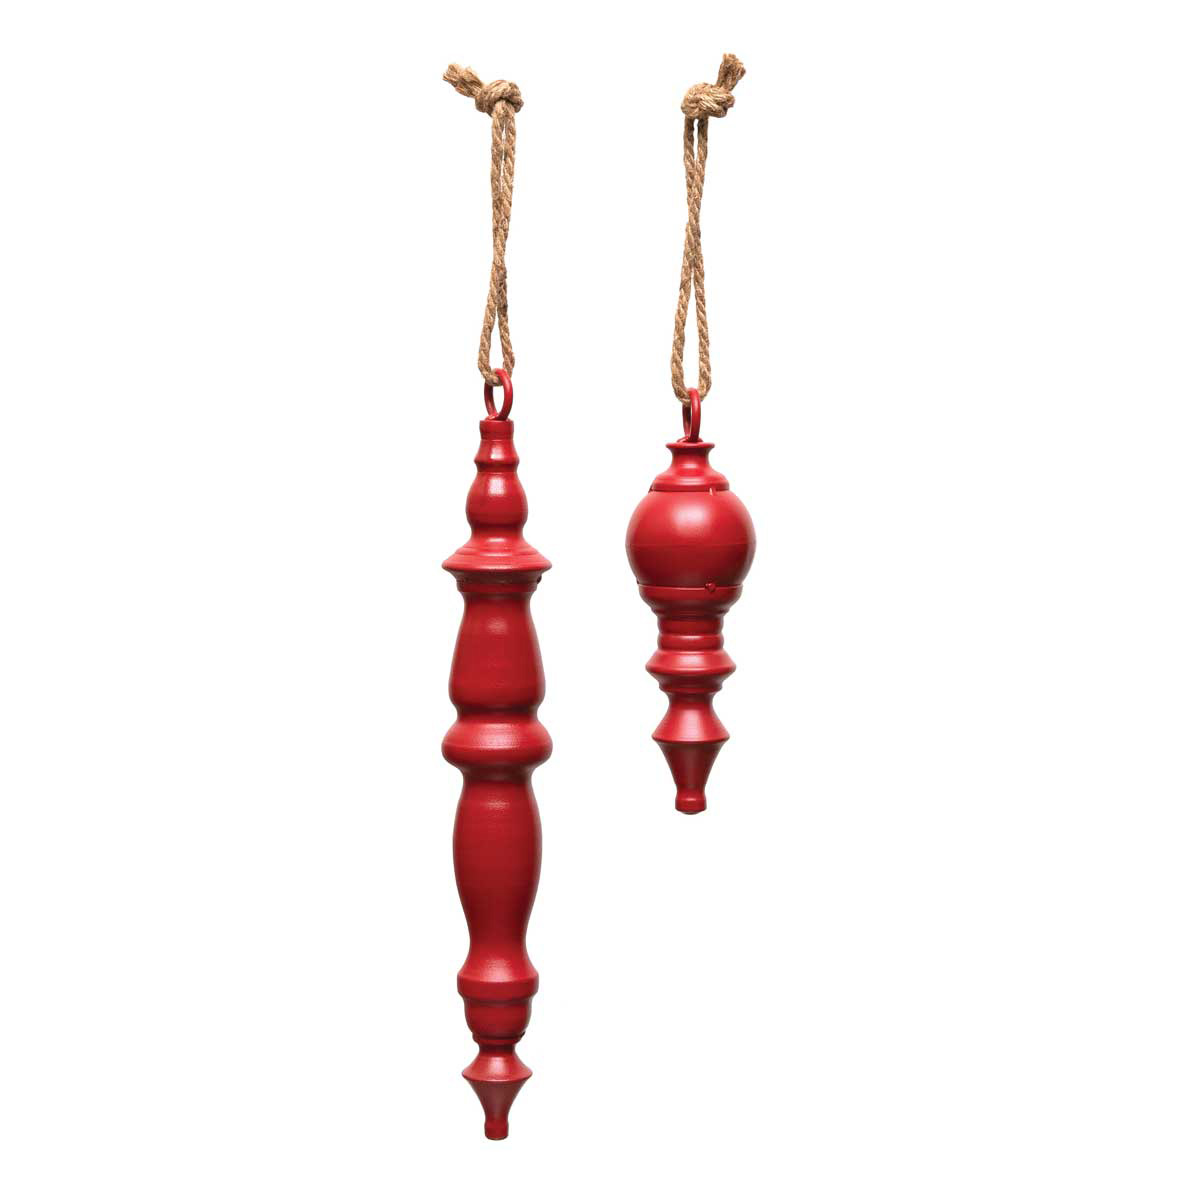 ORNAMENT FINIAL MATTE RED LARGE 2.5IN X 16IN METAL - Click Image to Close